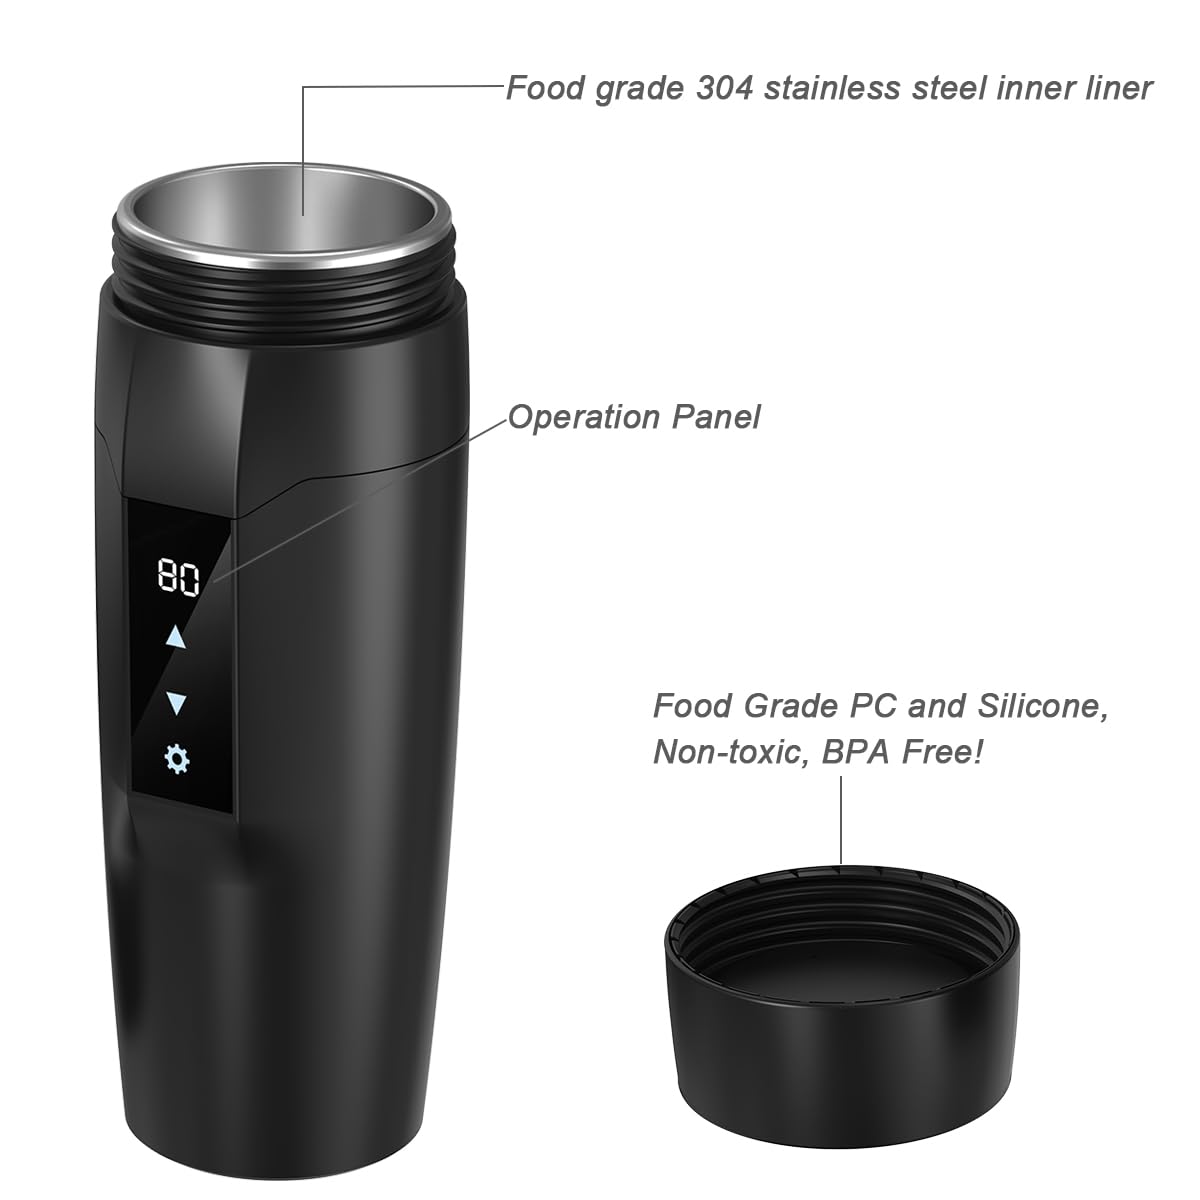 Portable Car Heating Cup, 350 ml Travel Electric Kettle, 304 Stainless Steel Liner Car Heated Mug, 40~100℃ Adjustable, 12V 80W Fast Boiling Bottle, Leak-Proof, Anti-Dry Burn Protection(Black)